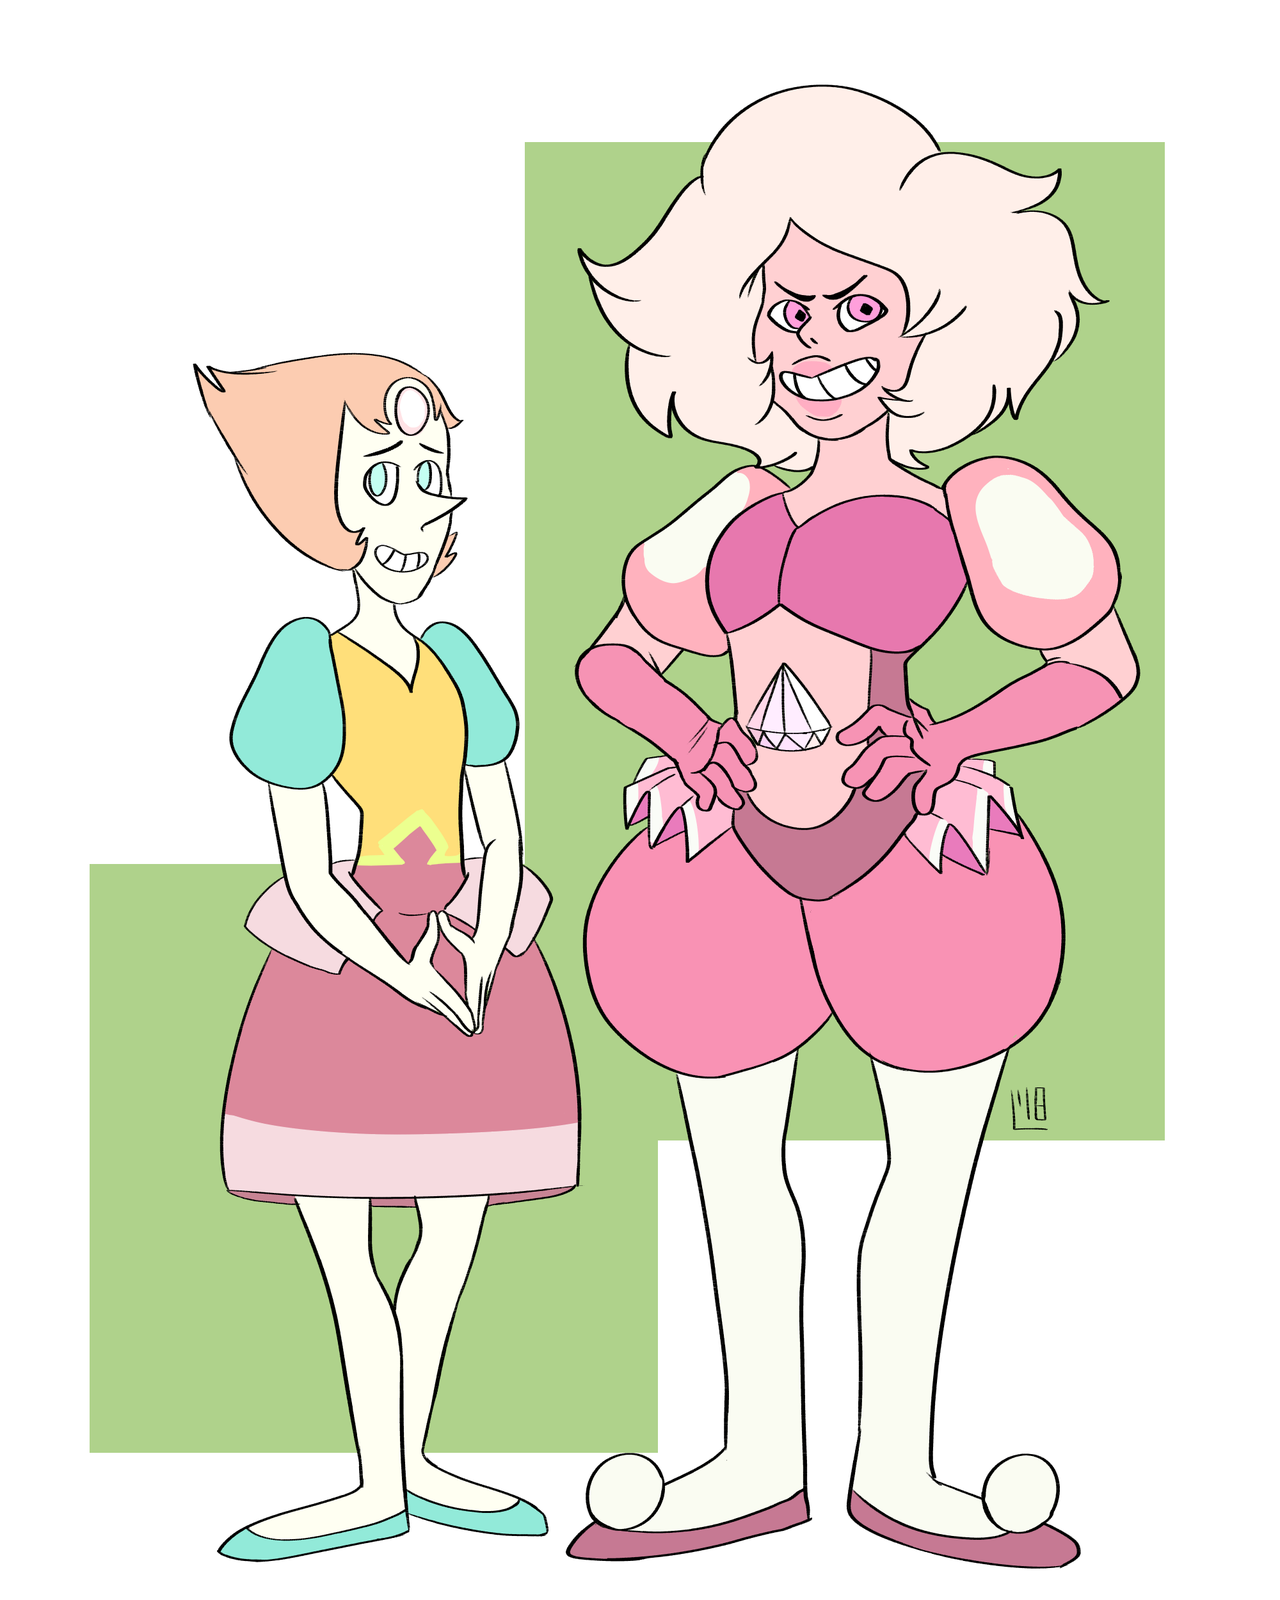 A Diamond and her Pearl. Finally got around to drawing past Pearl and Pink together.